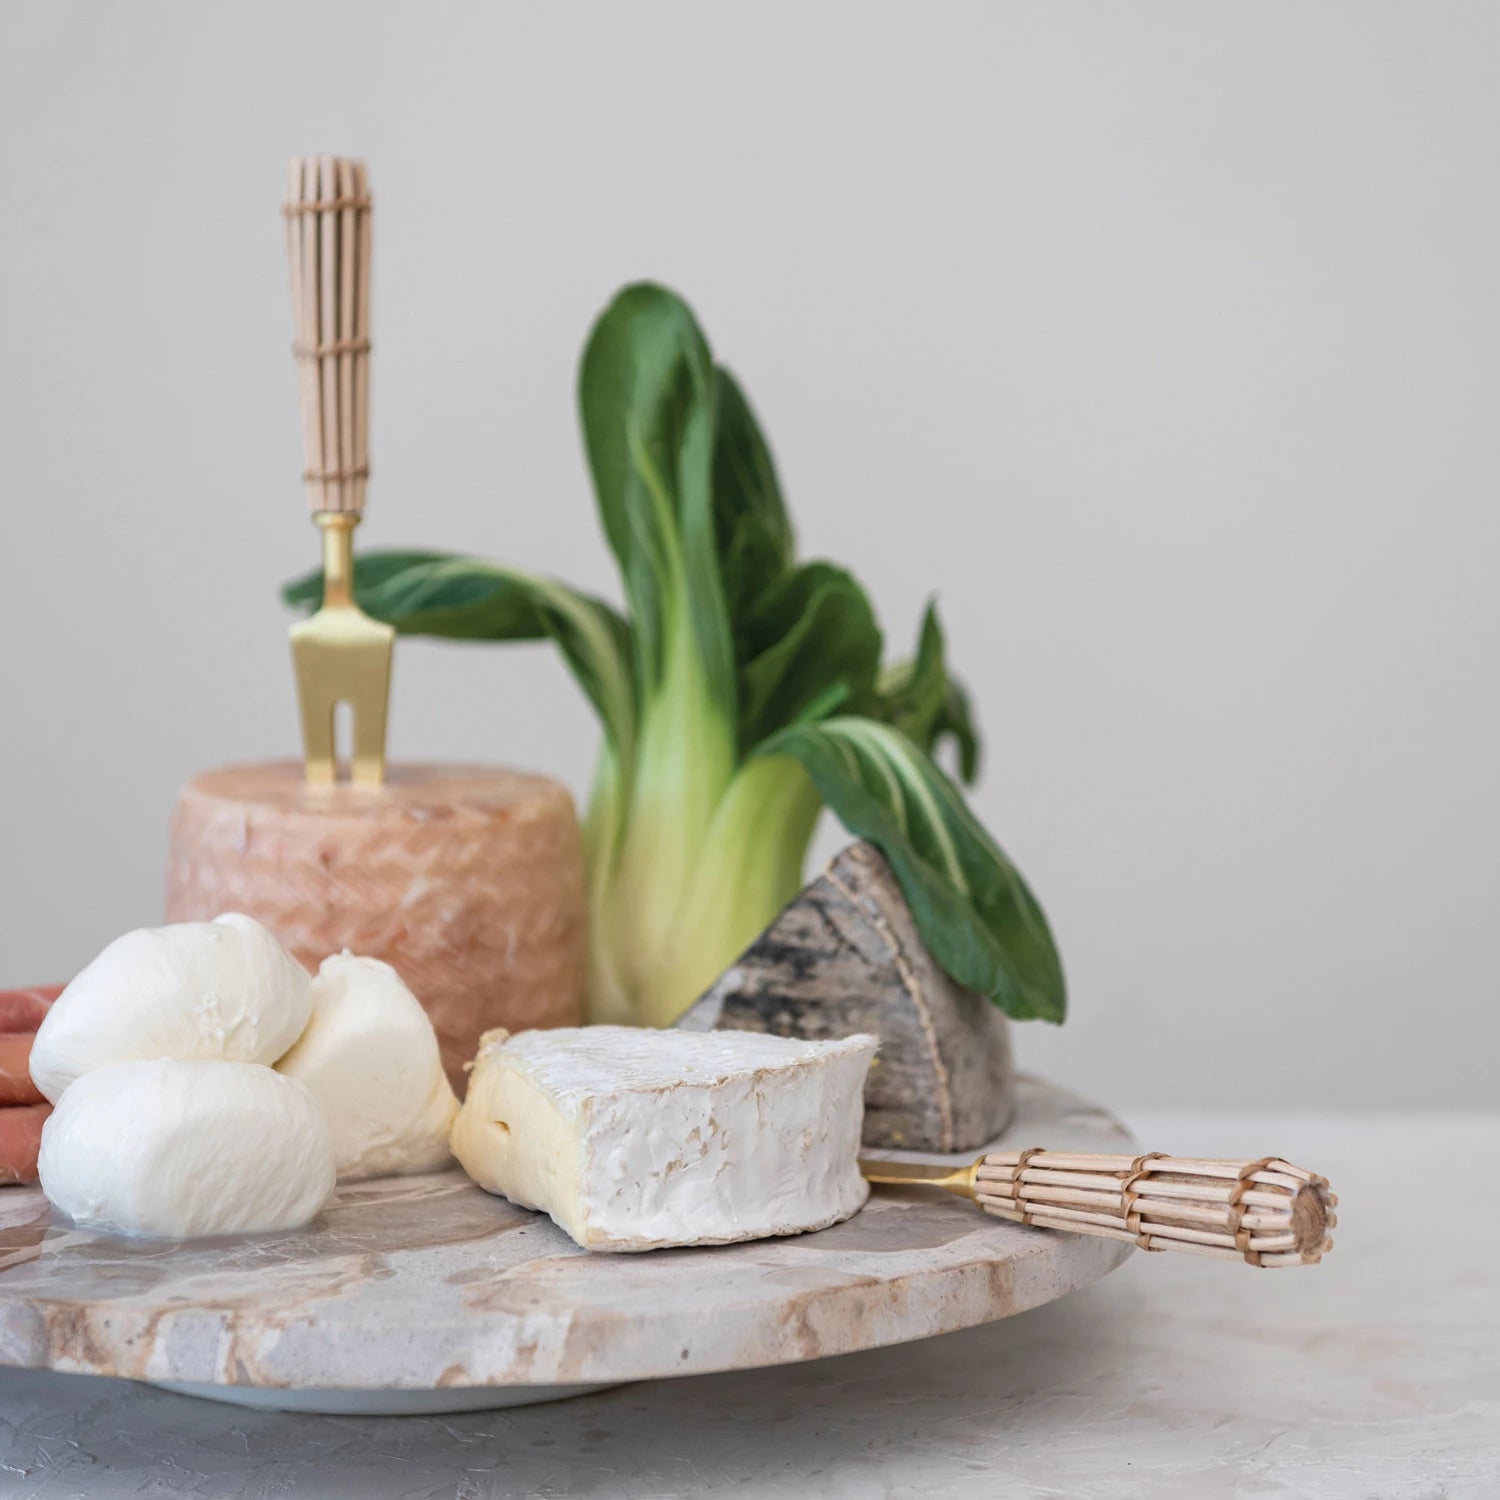 marble lazy susan with cheeses, Bok choi, and utensils on it.